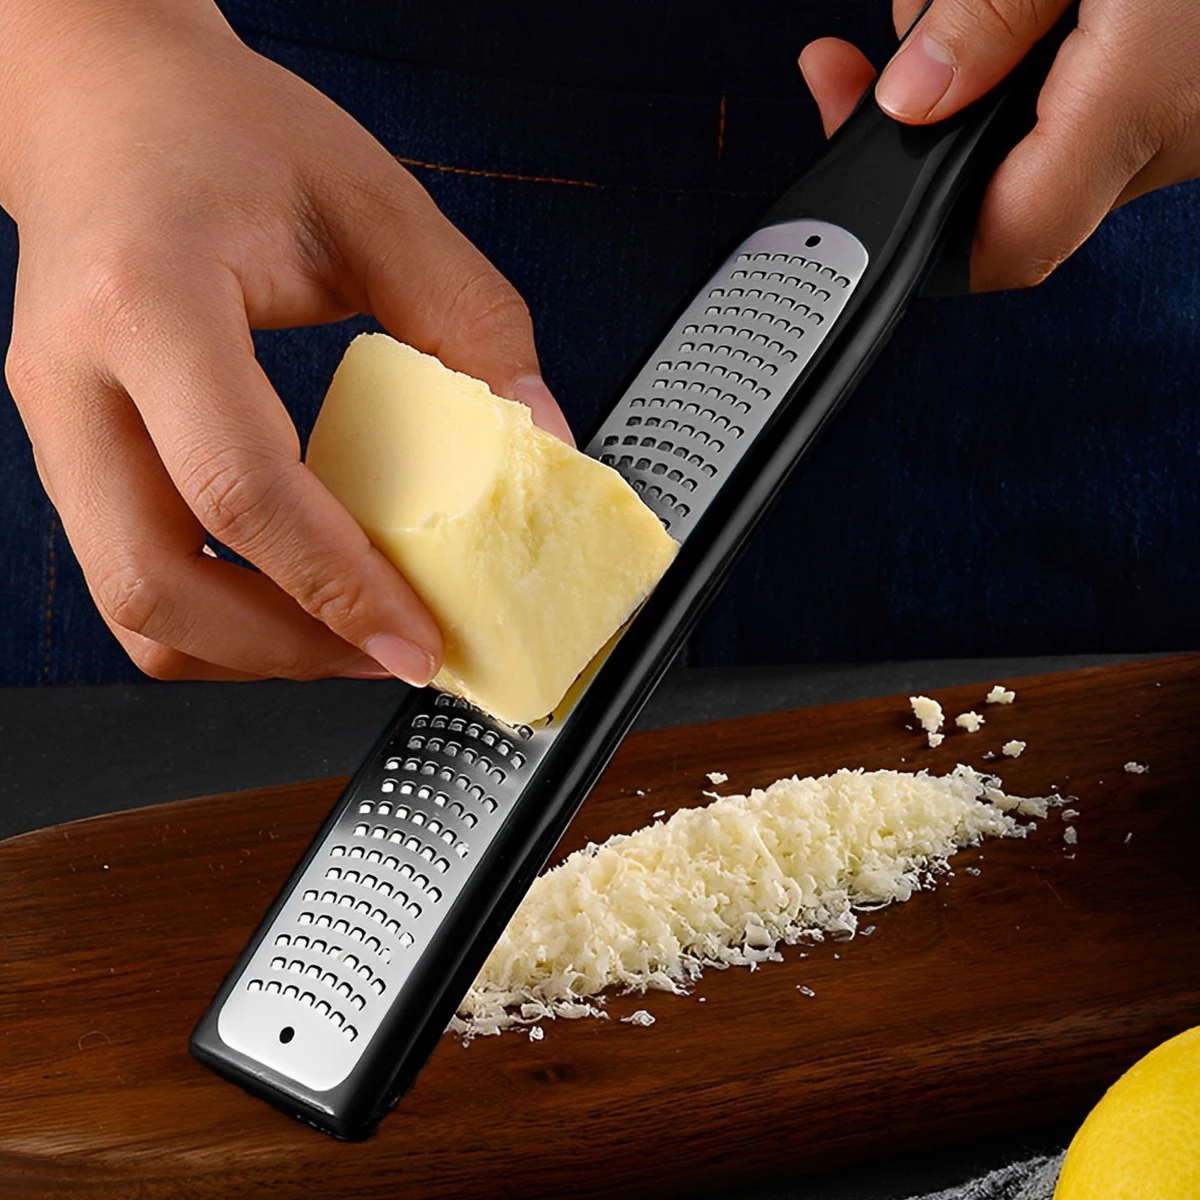 https://ae01.alicdn.com/kf/Sb210f836b4ff48559e55991e4fdb5316E/Stainless-Steel-Lemon-Zester-Professional-Kitchen-Cheese-and-Citrus-Grater-with-Protective-Tool-for-Lime-Garlic.jpg